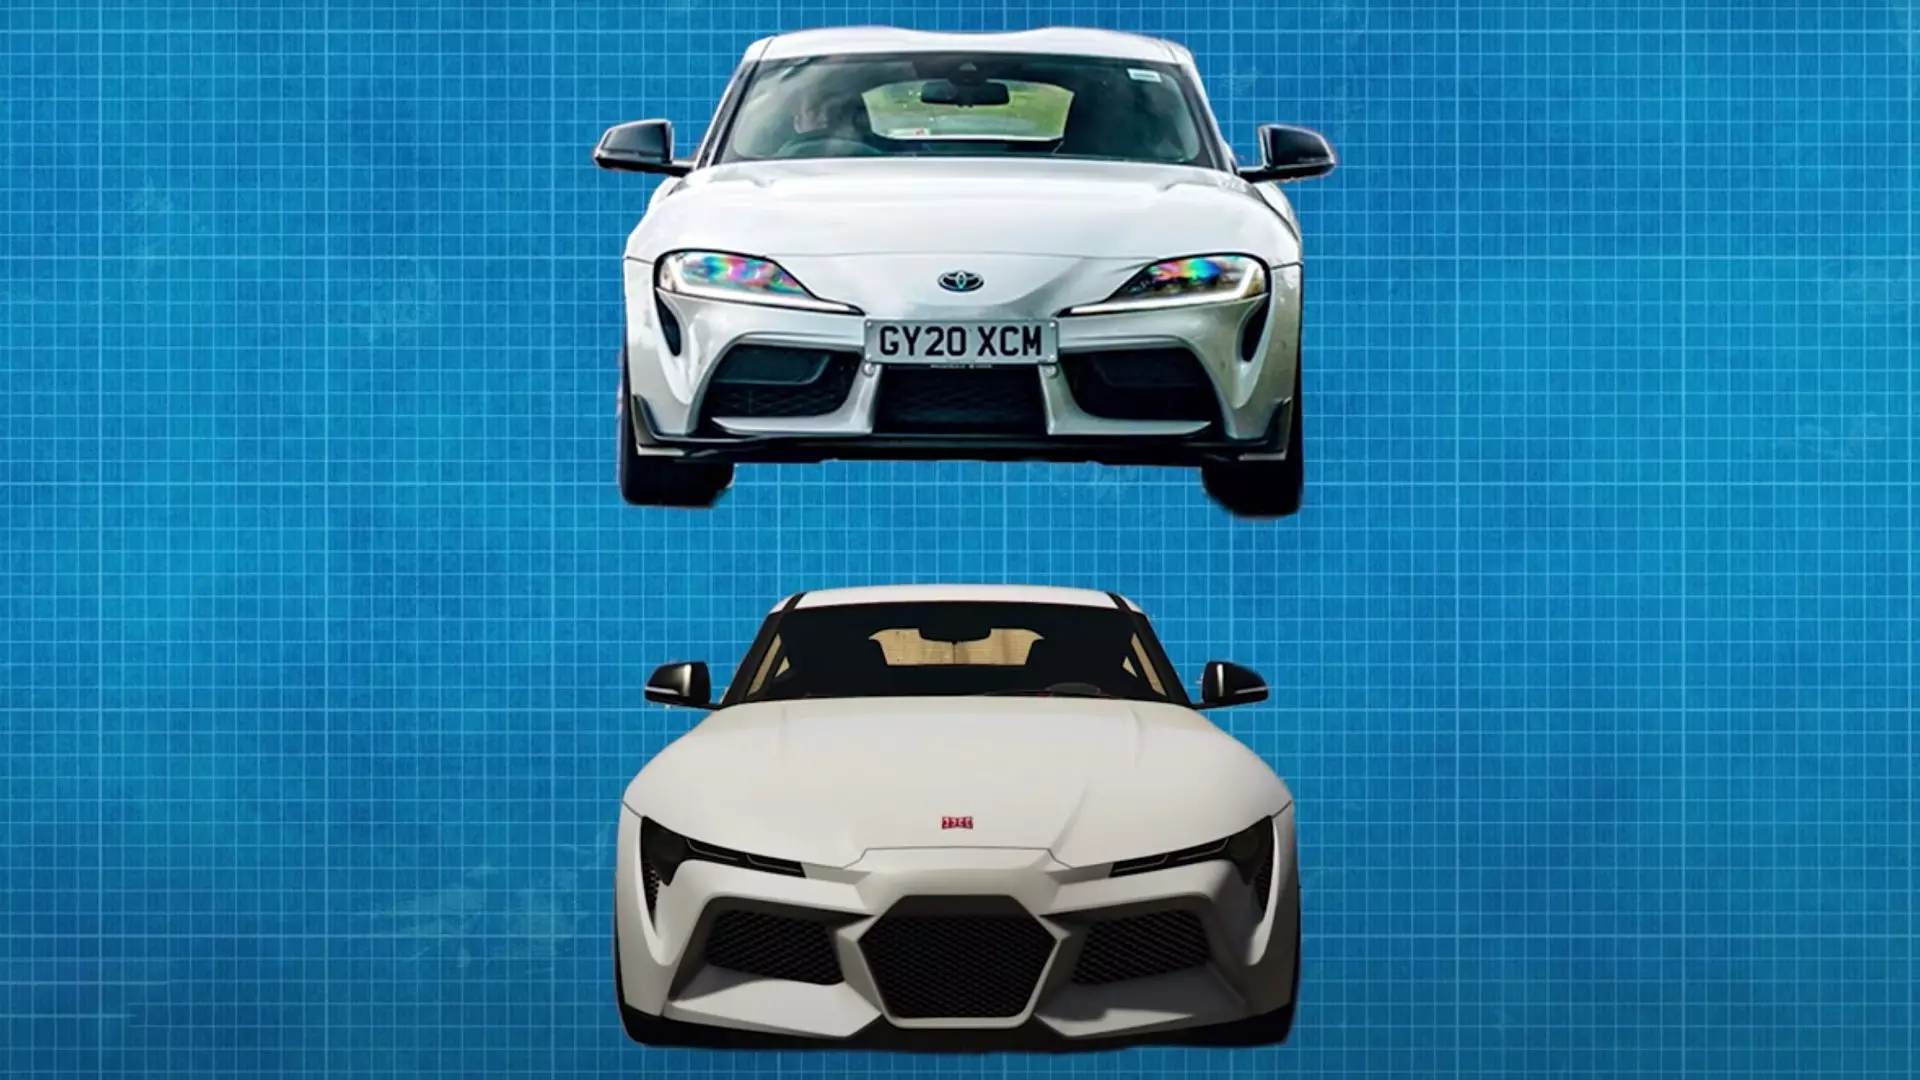 Take a Deep Dive on GTA V Tuner Cars With a Pro Car Designer | Autance